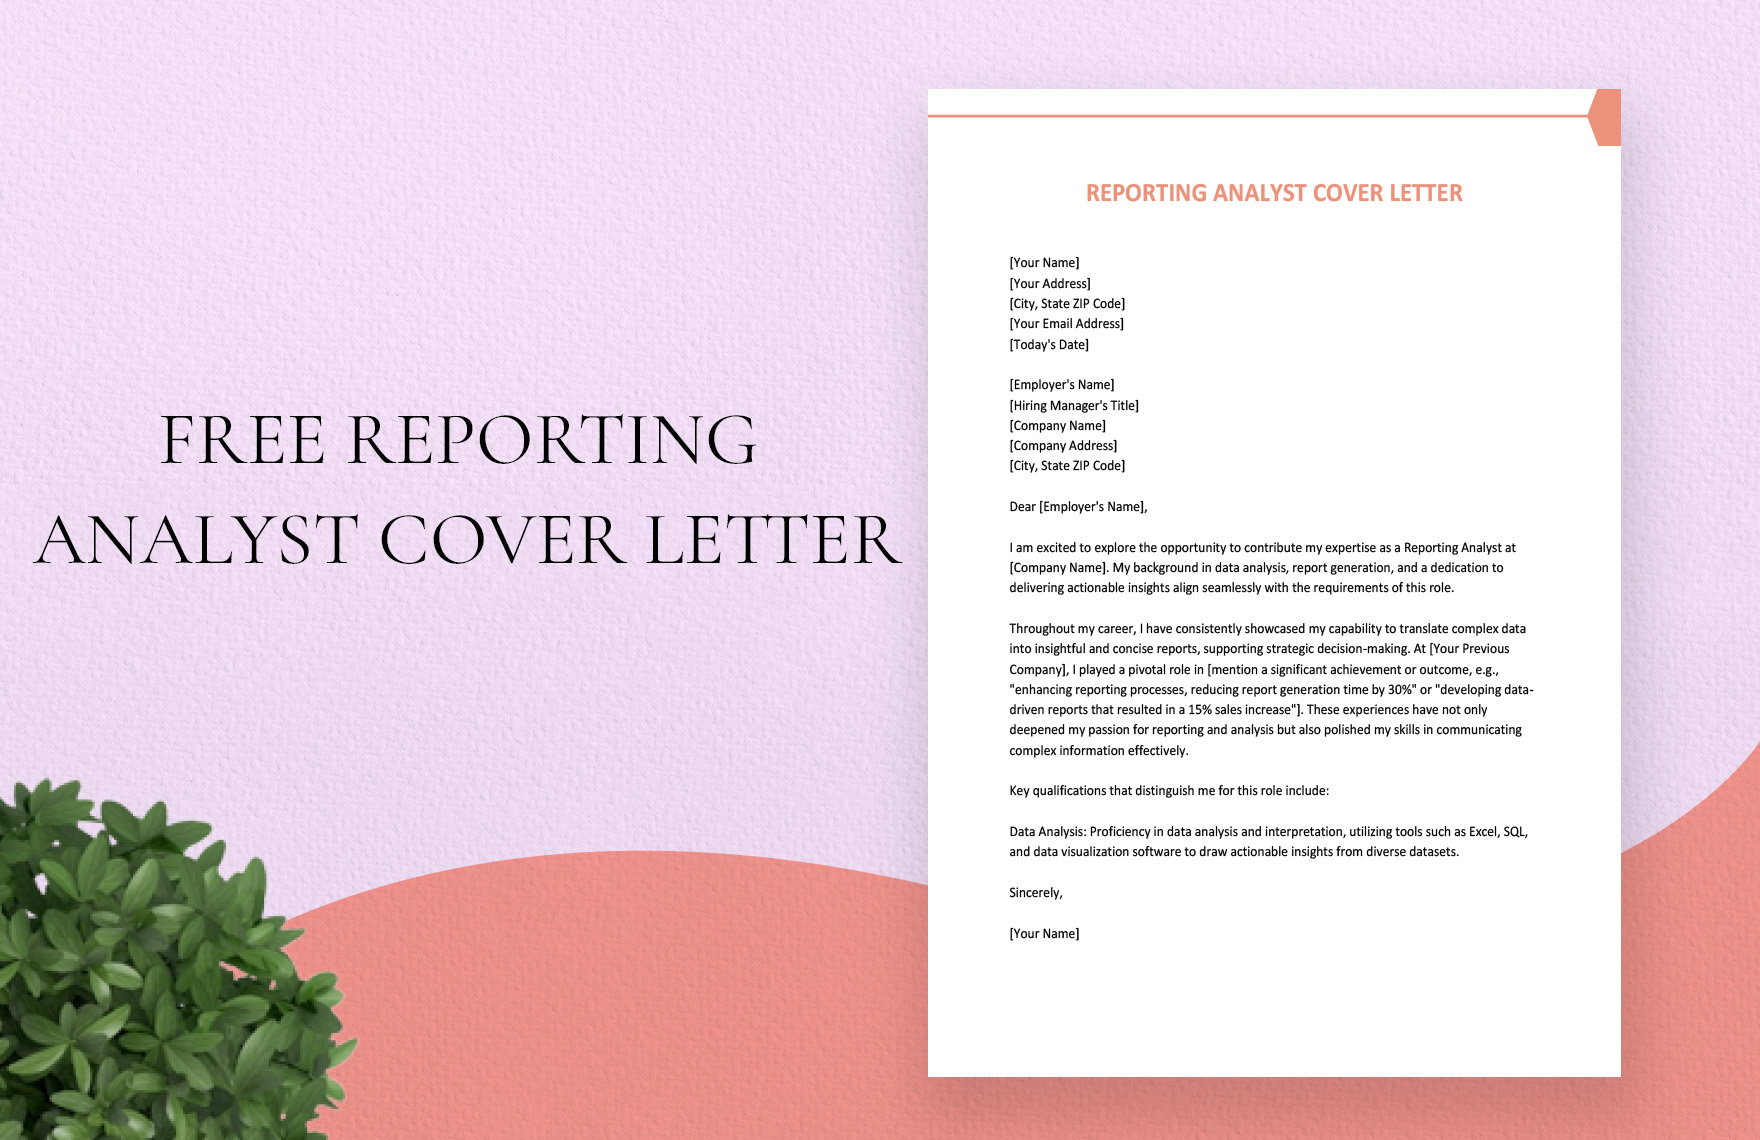 Reporting Analyst Cover Letter